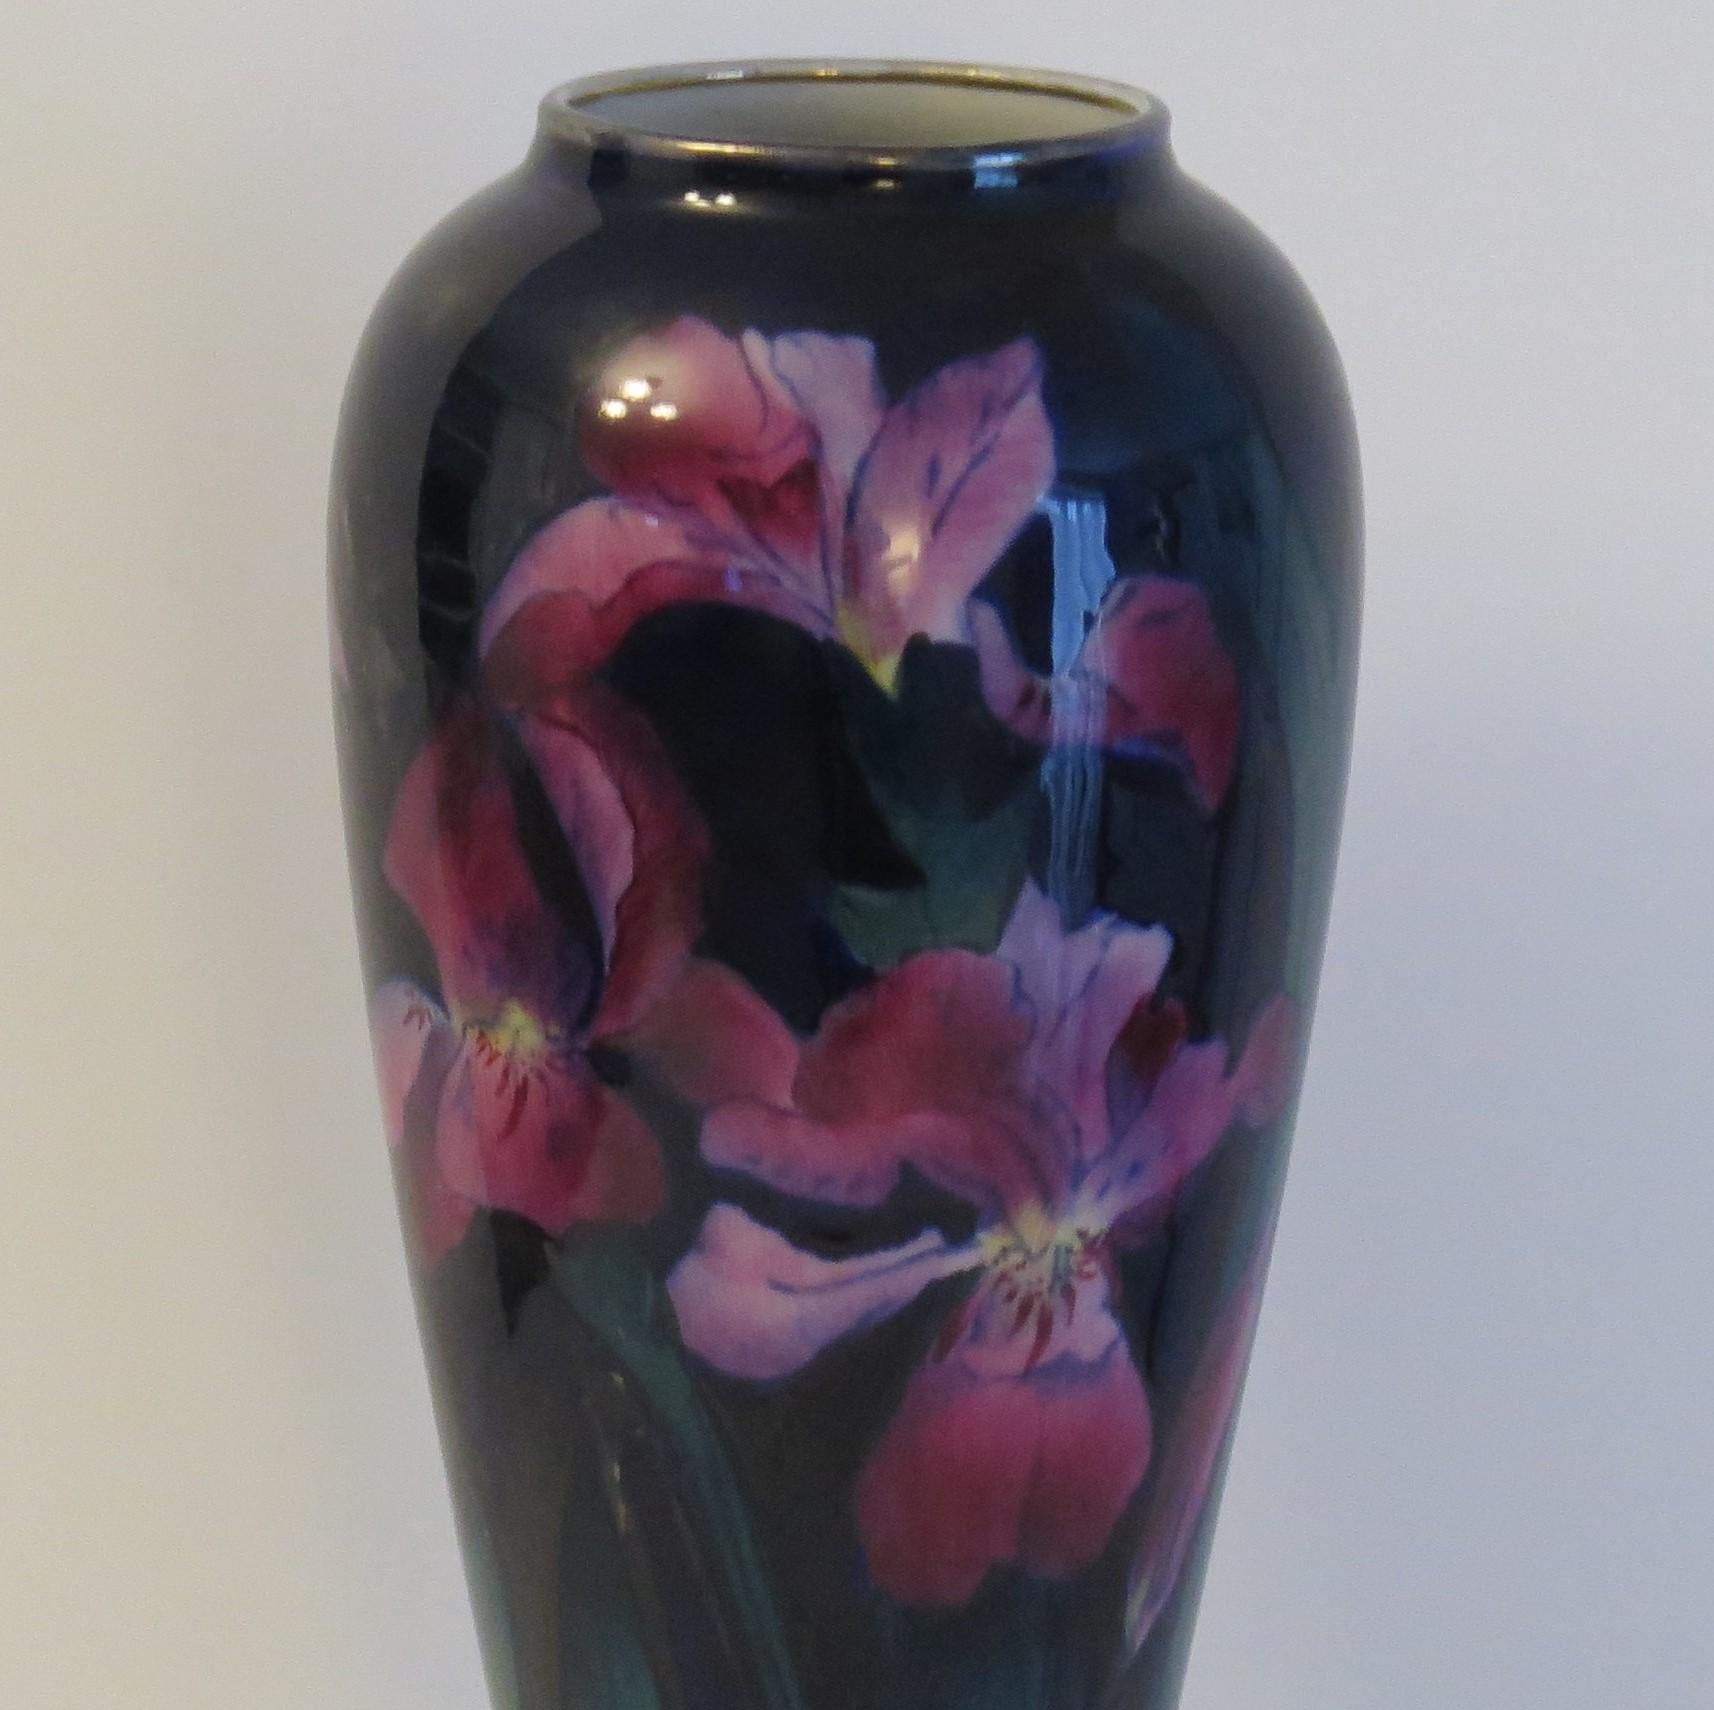 This is a tall beautifully decorated Vase by George Jones & Sons, of Trent Pottery, Staffordshire, dating to the late 19th Century.

This vase is well potted vase with a tall baluster shape and open neck.

This piece is beautifully decorated in